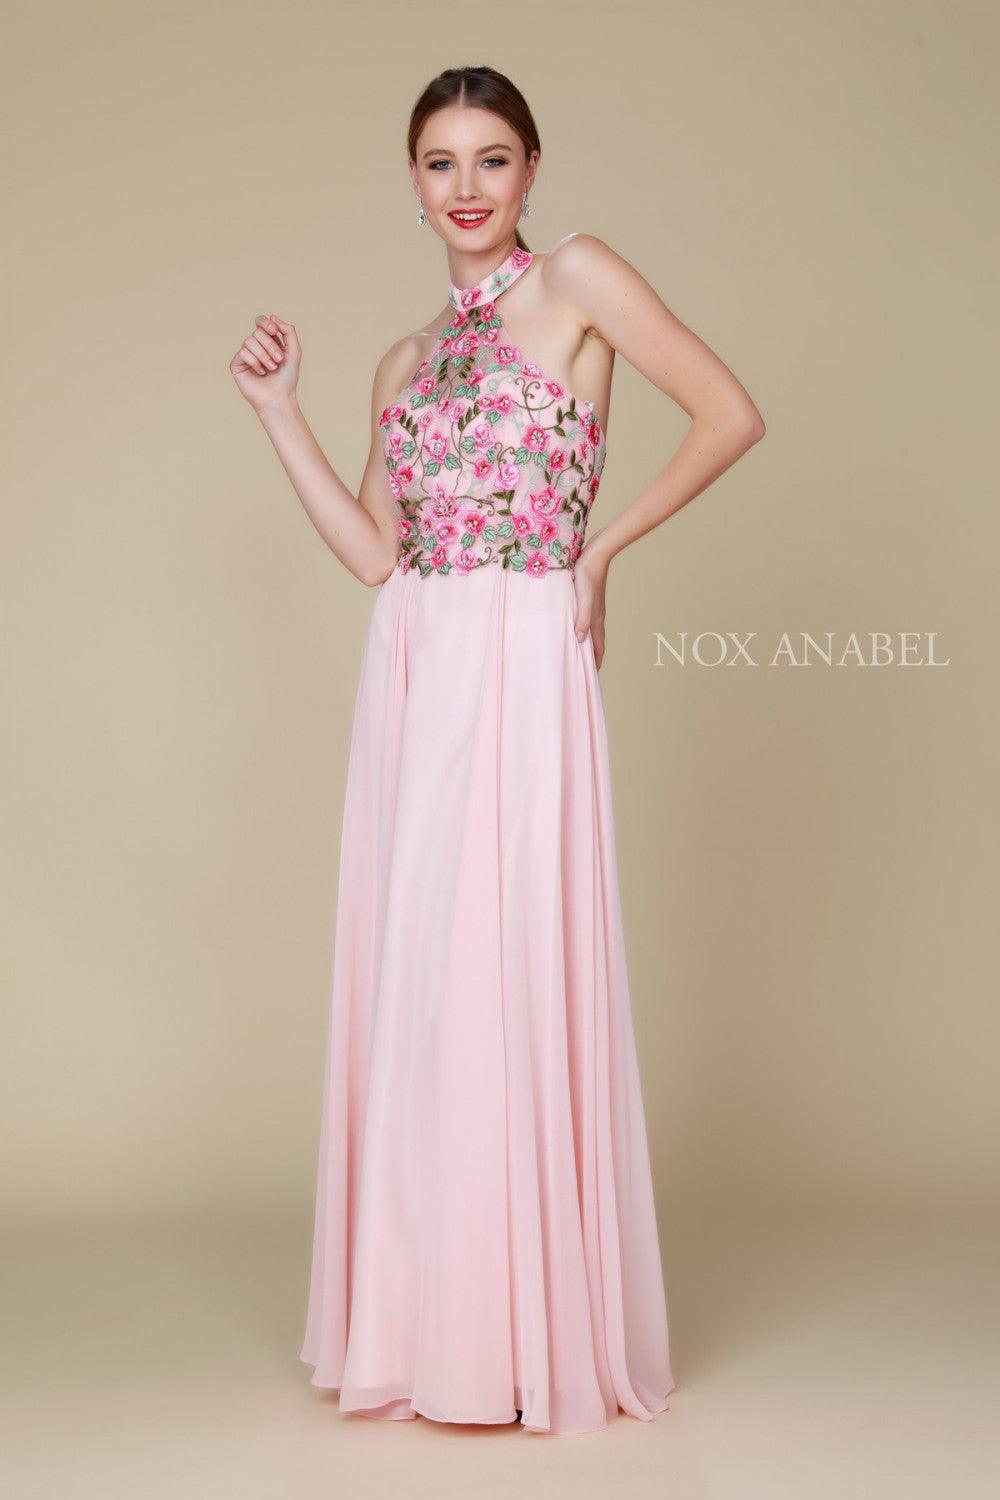 Long Halter Floral Bodice Formal Evening Gown - The Dress Outlet Nox Anabel